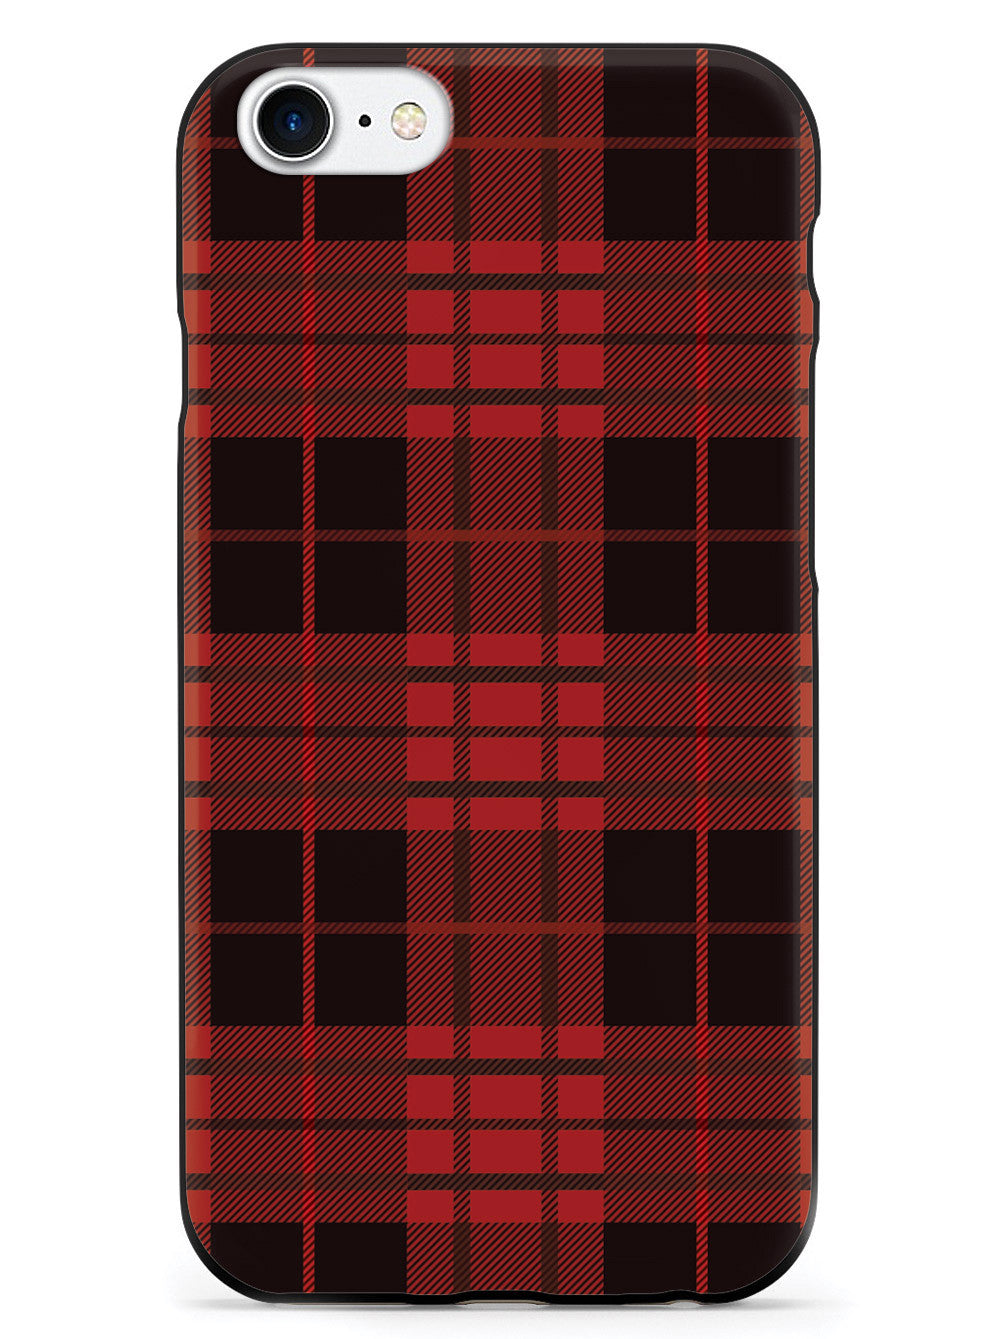 Red and Black Plaid - Black Case